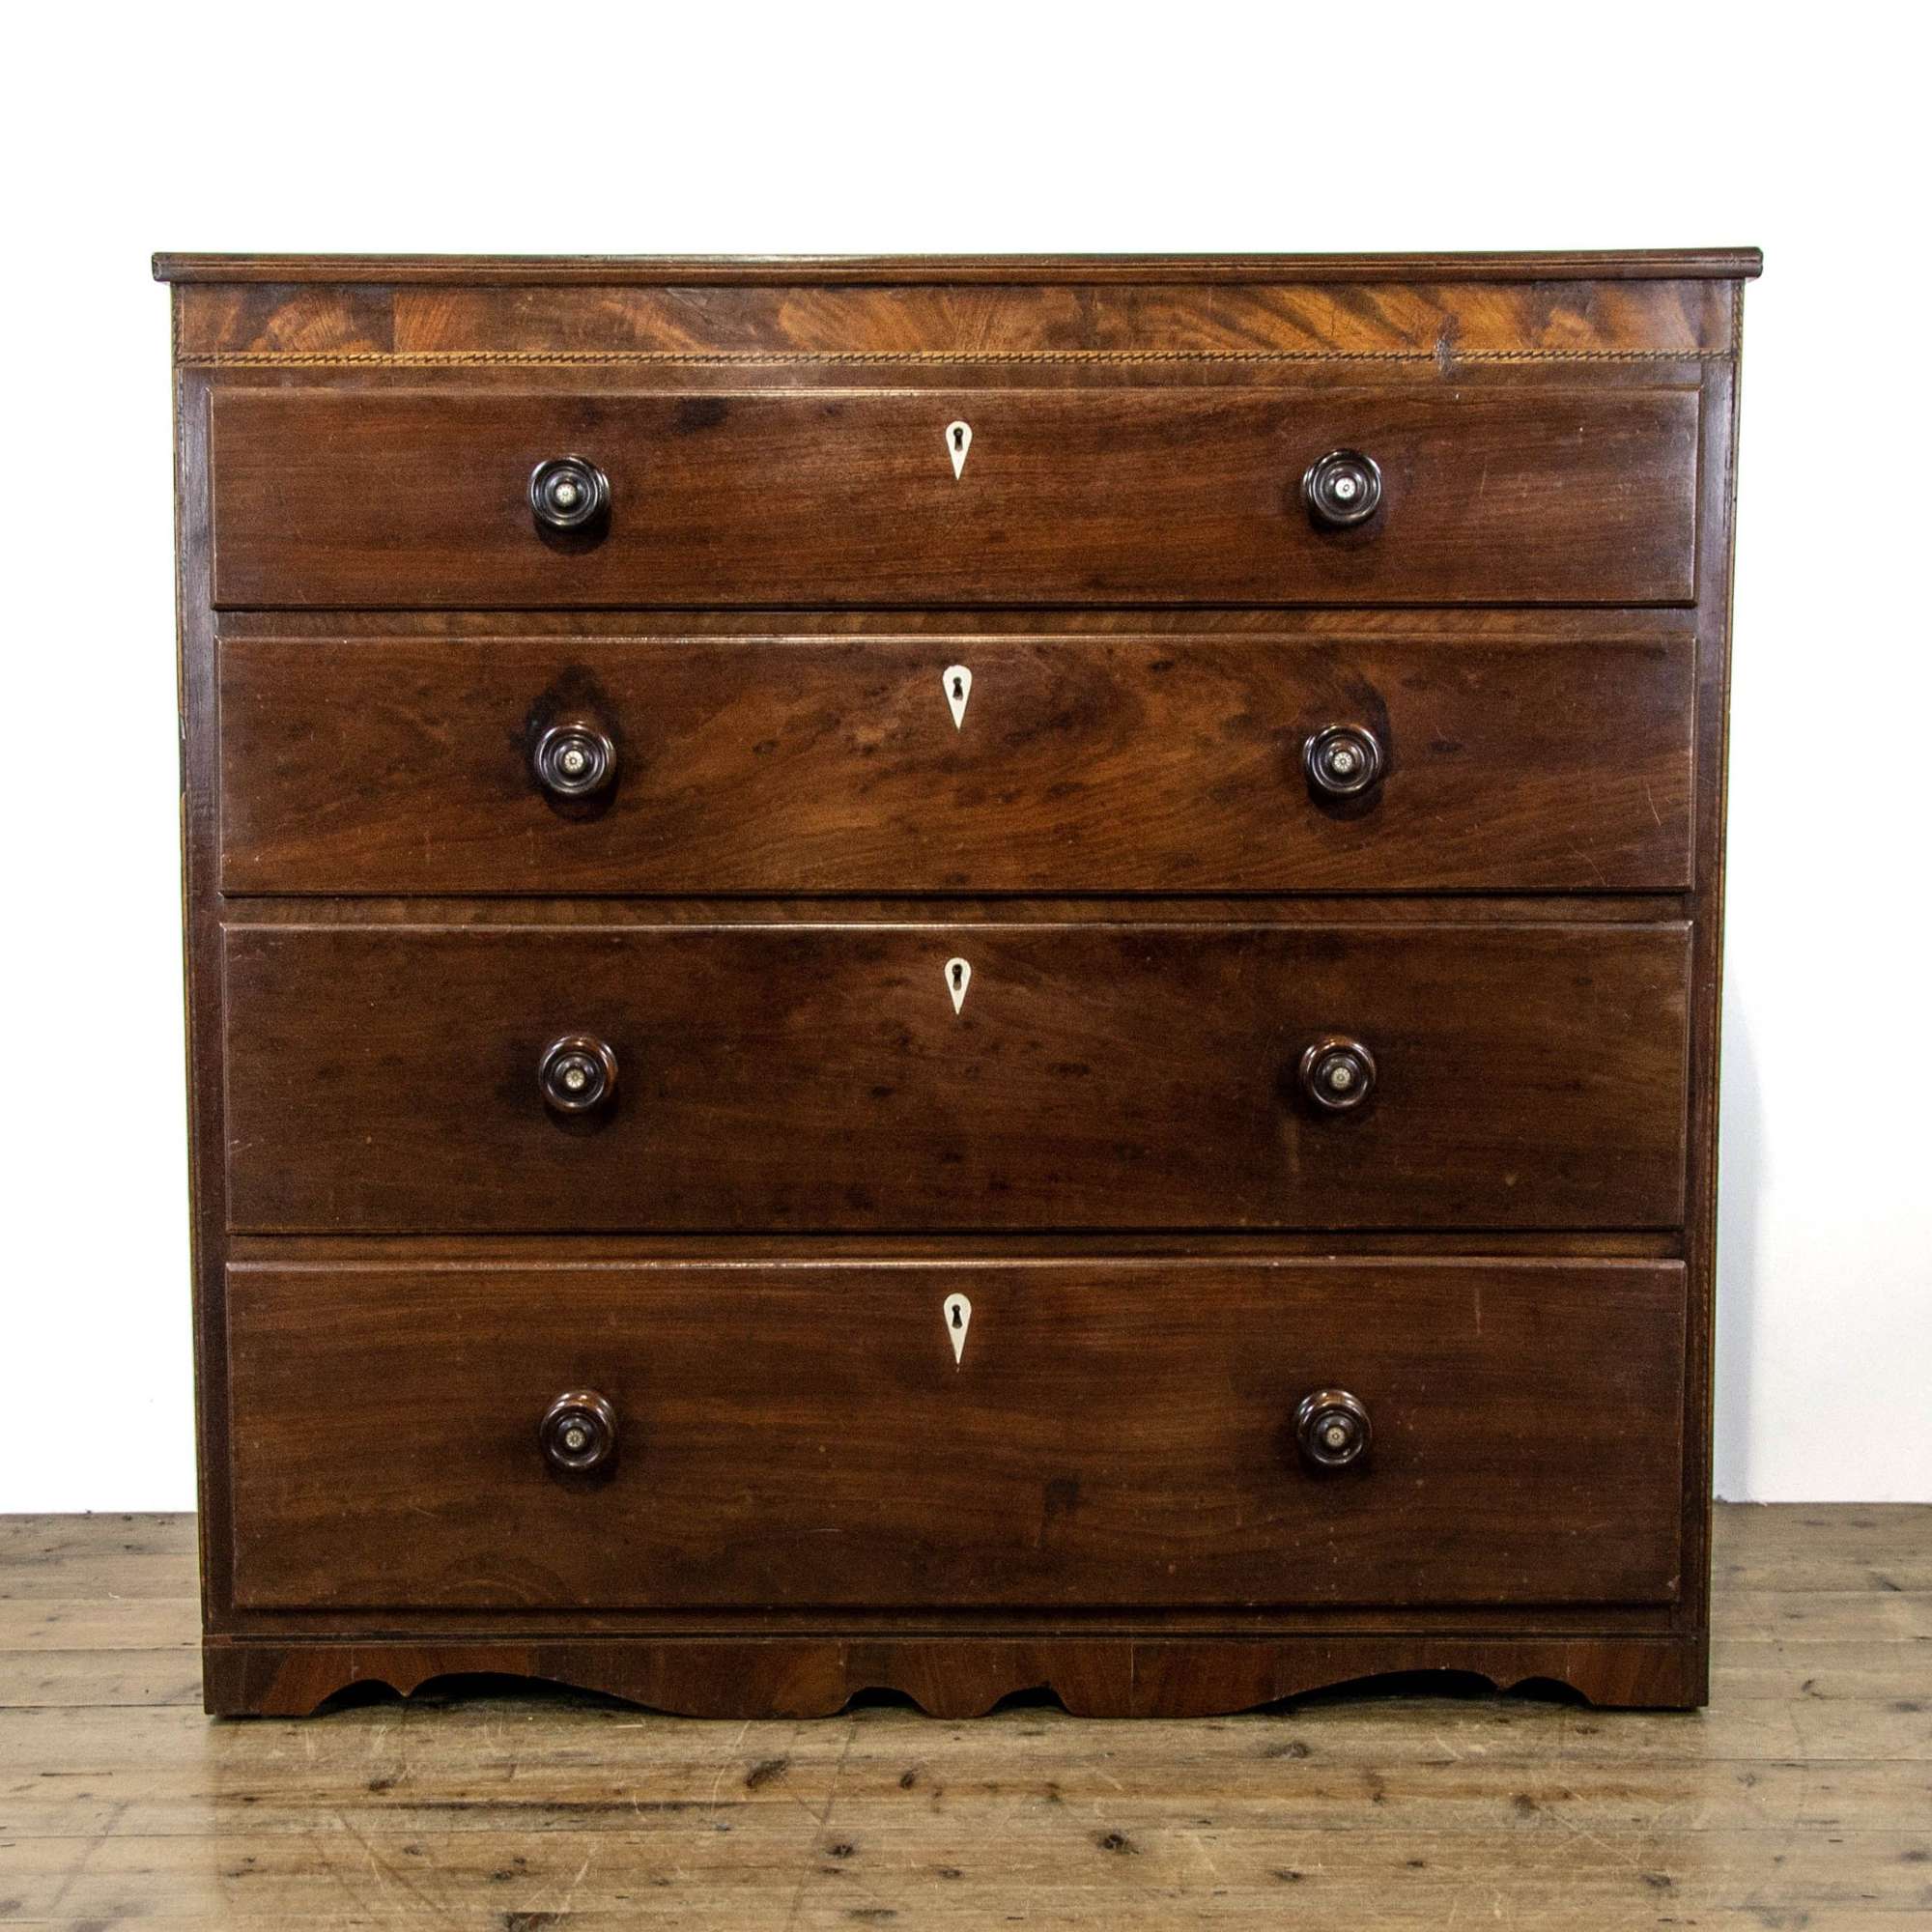 Antique Inlaid Mahogany Chest Of Drawers